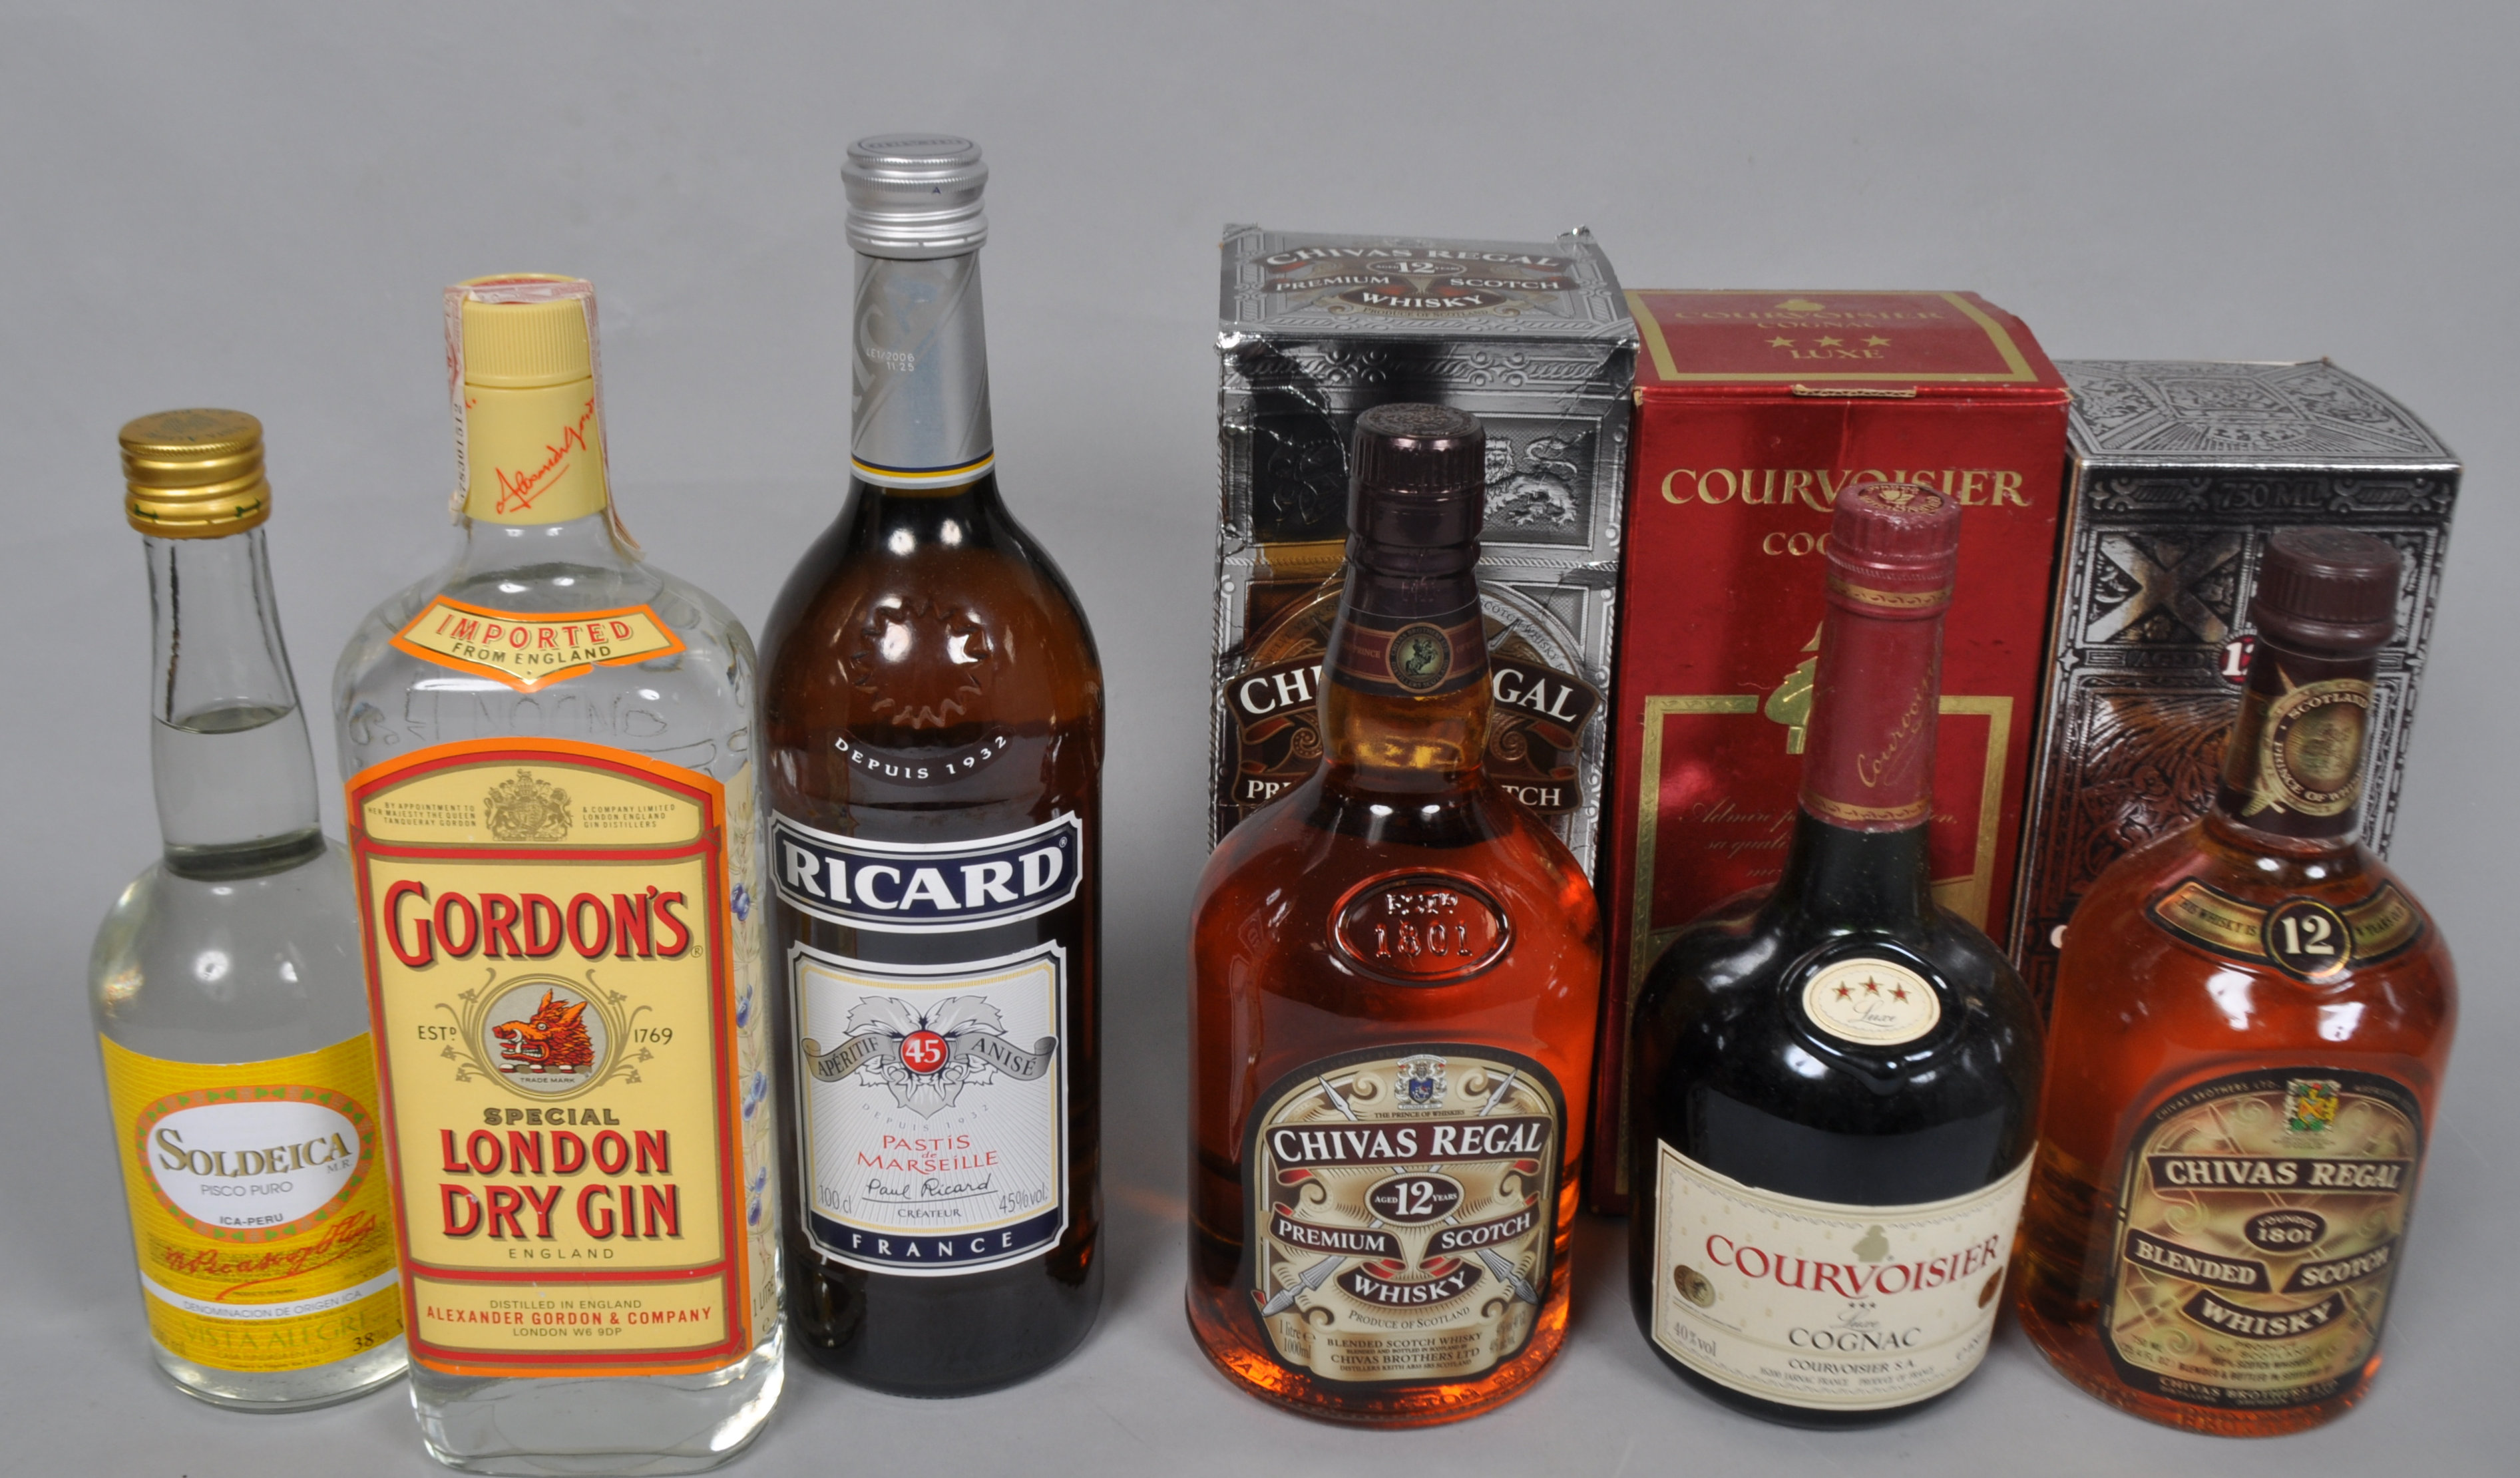 A boxed Chival Regal, aged 12 years, 1 Litre and other bottles